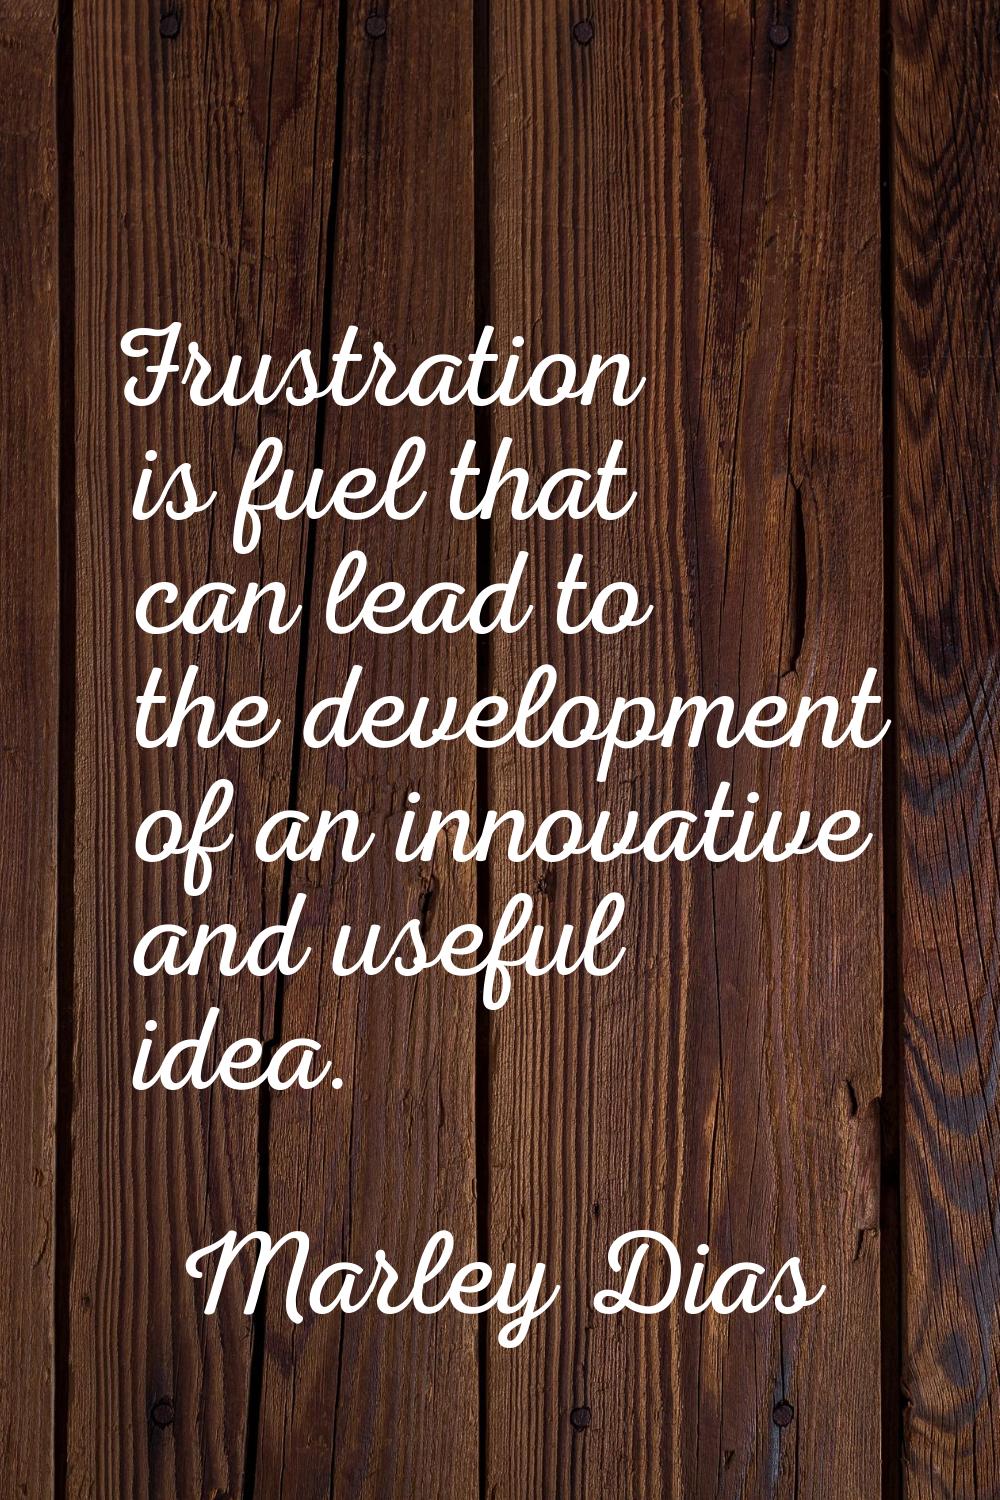 Frustration is fuel that can lead to the development of an innovative and useful idea.